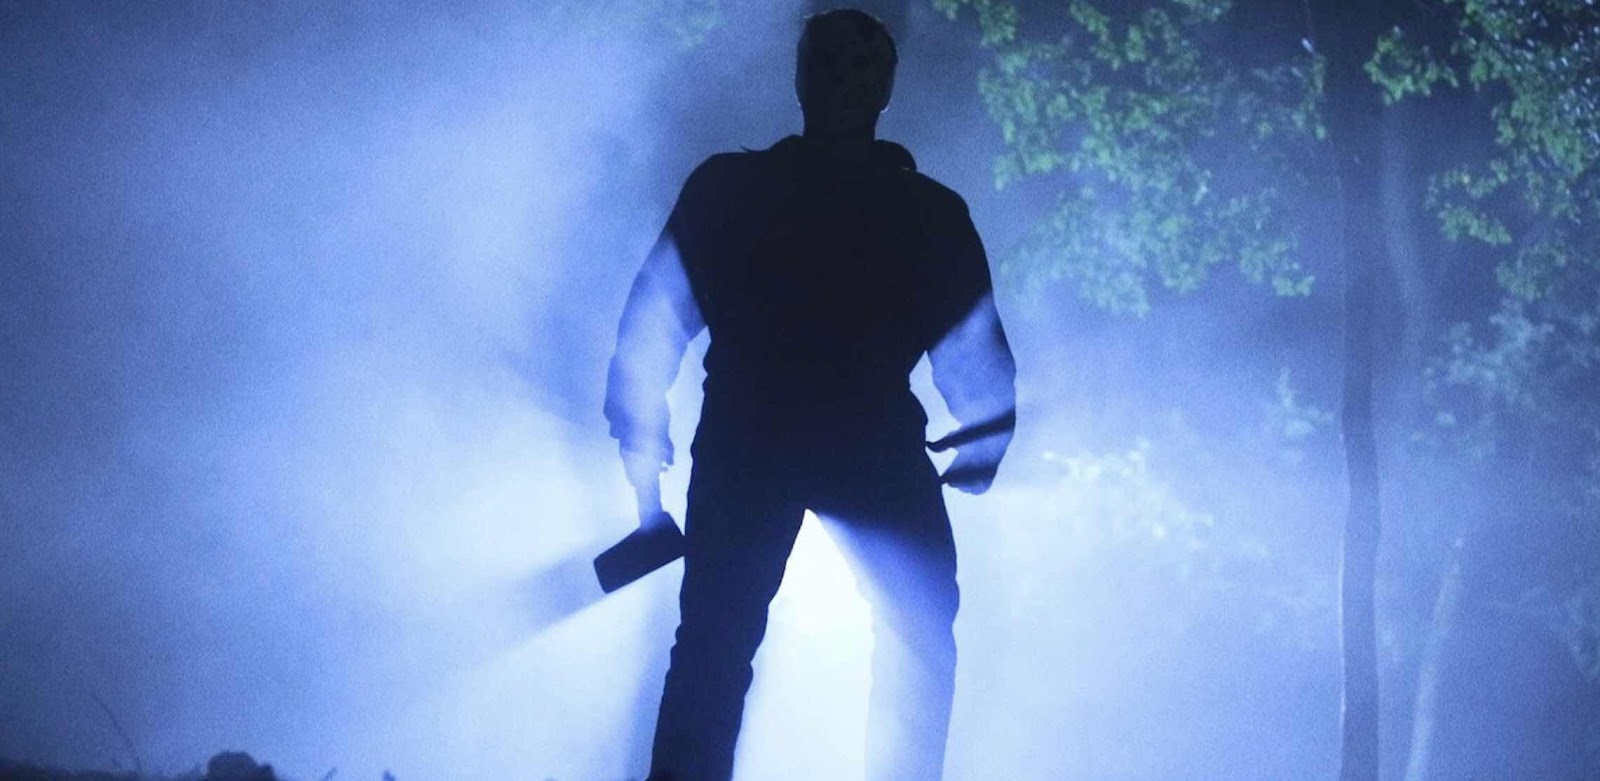 Trailer And Release Info For New Friday The 13th Fan Film 'Here Comes The Night'